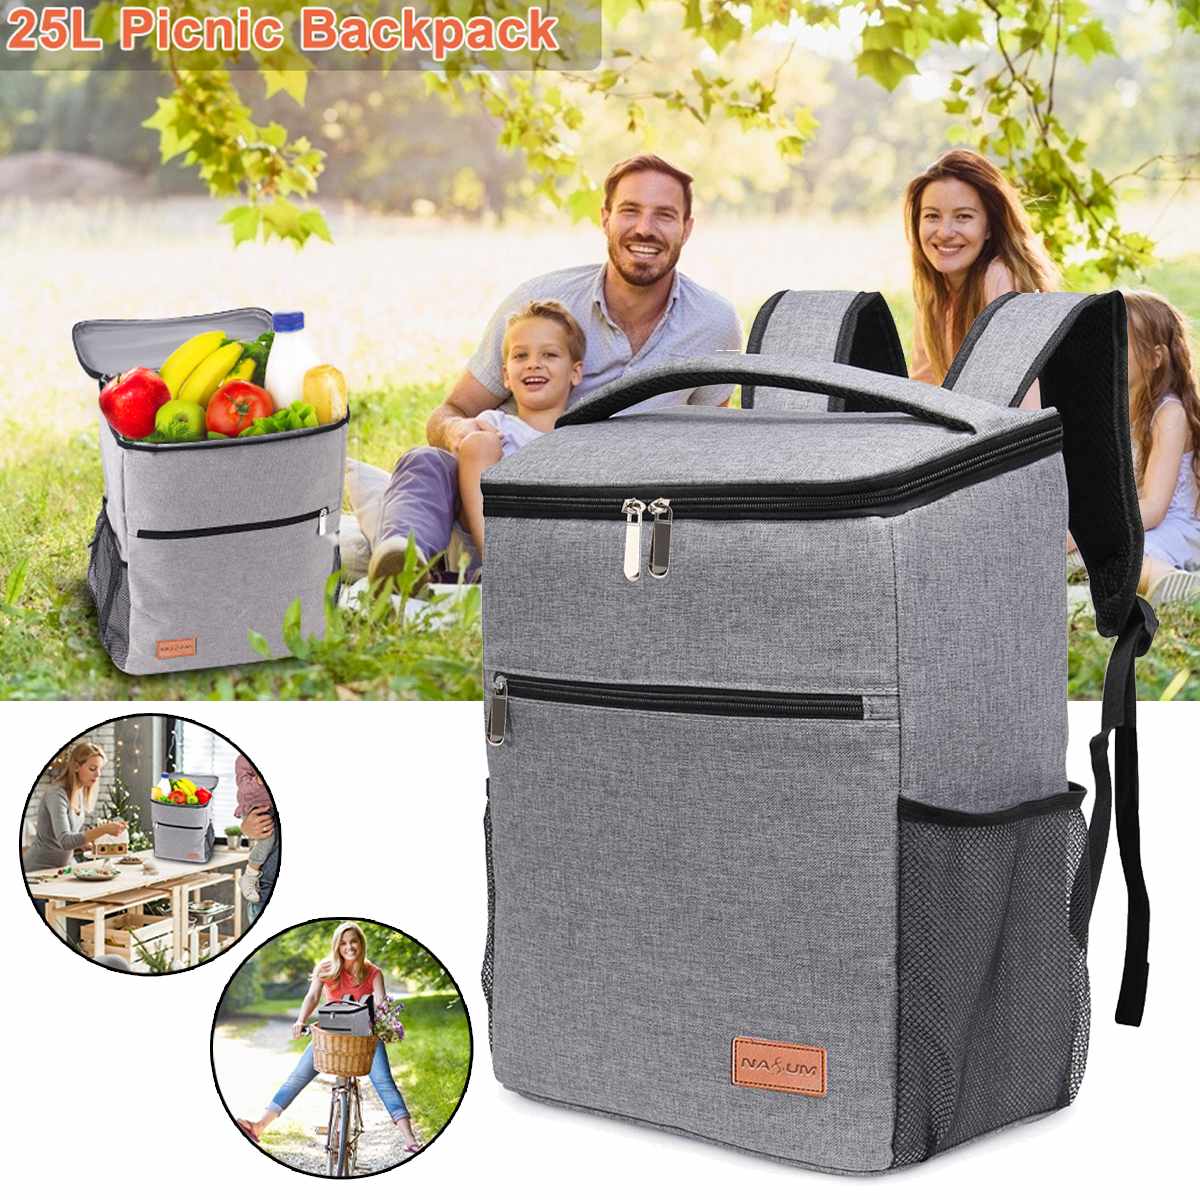 25L Picnic Bags Insulated Cooler Backpack Bag Leakproof Lightweight Backpack Refrigerator Bag for Picnic Hiking Camping Lunch